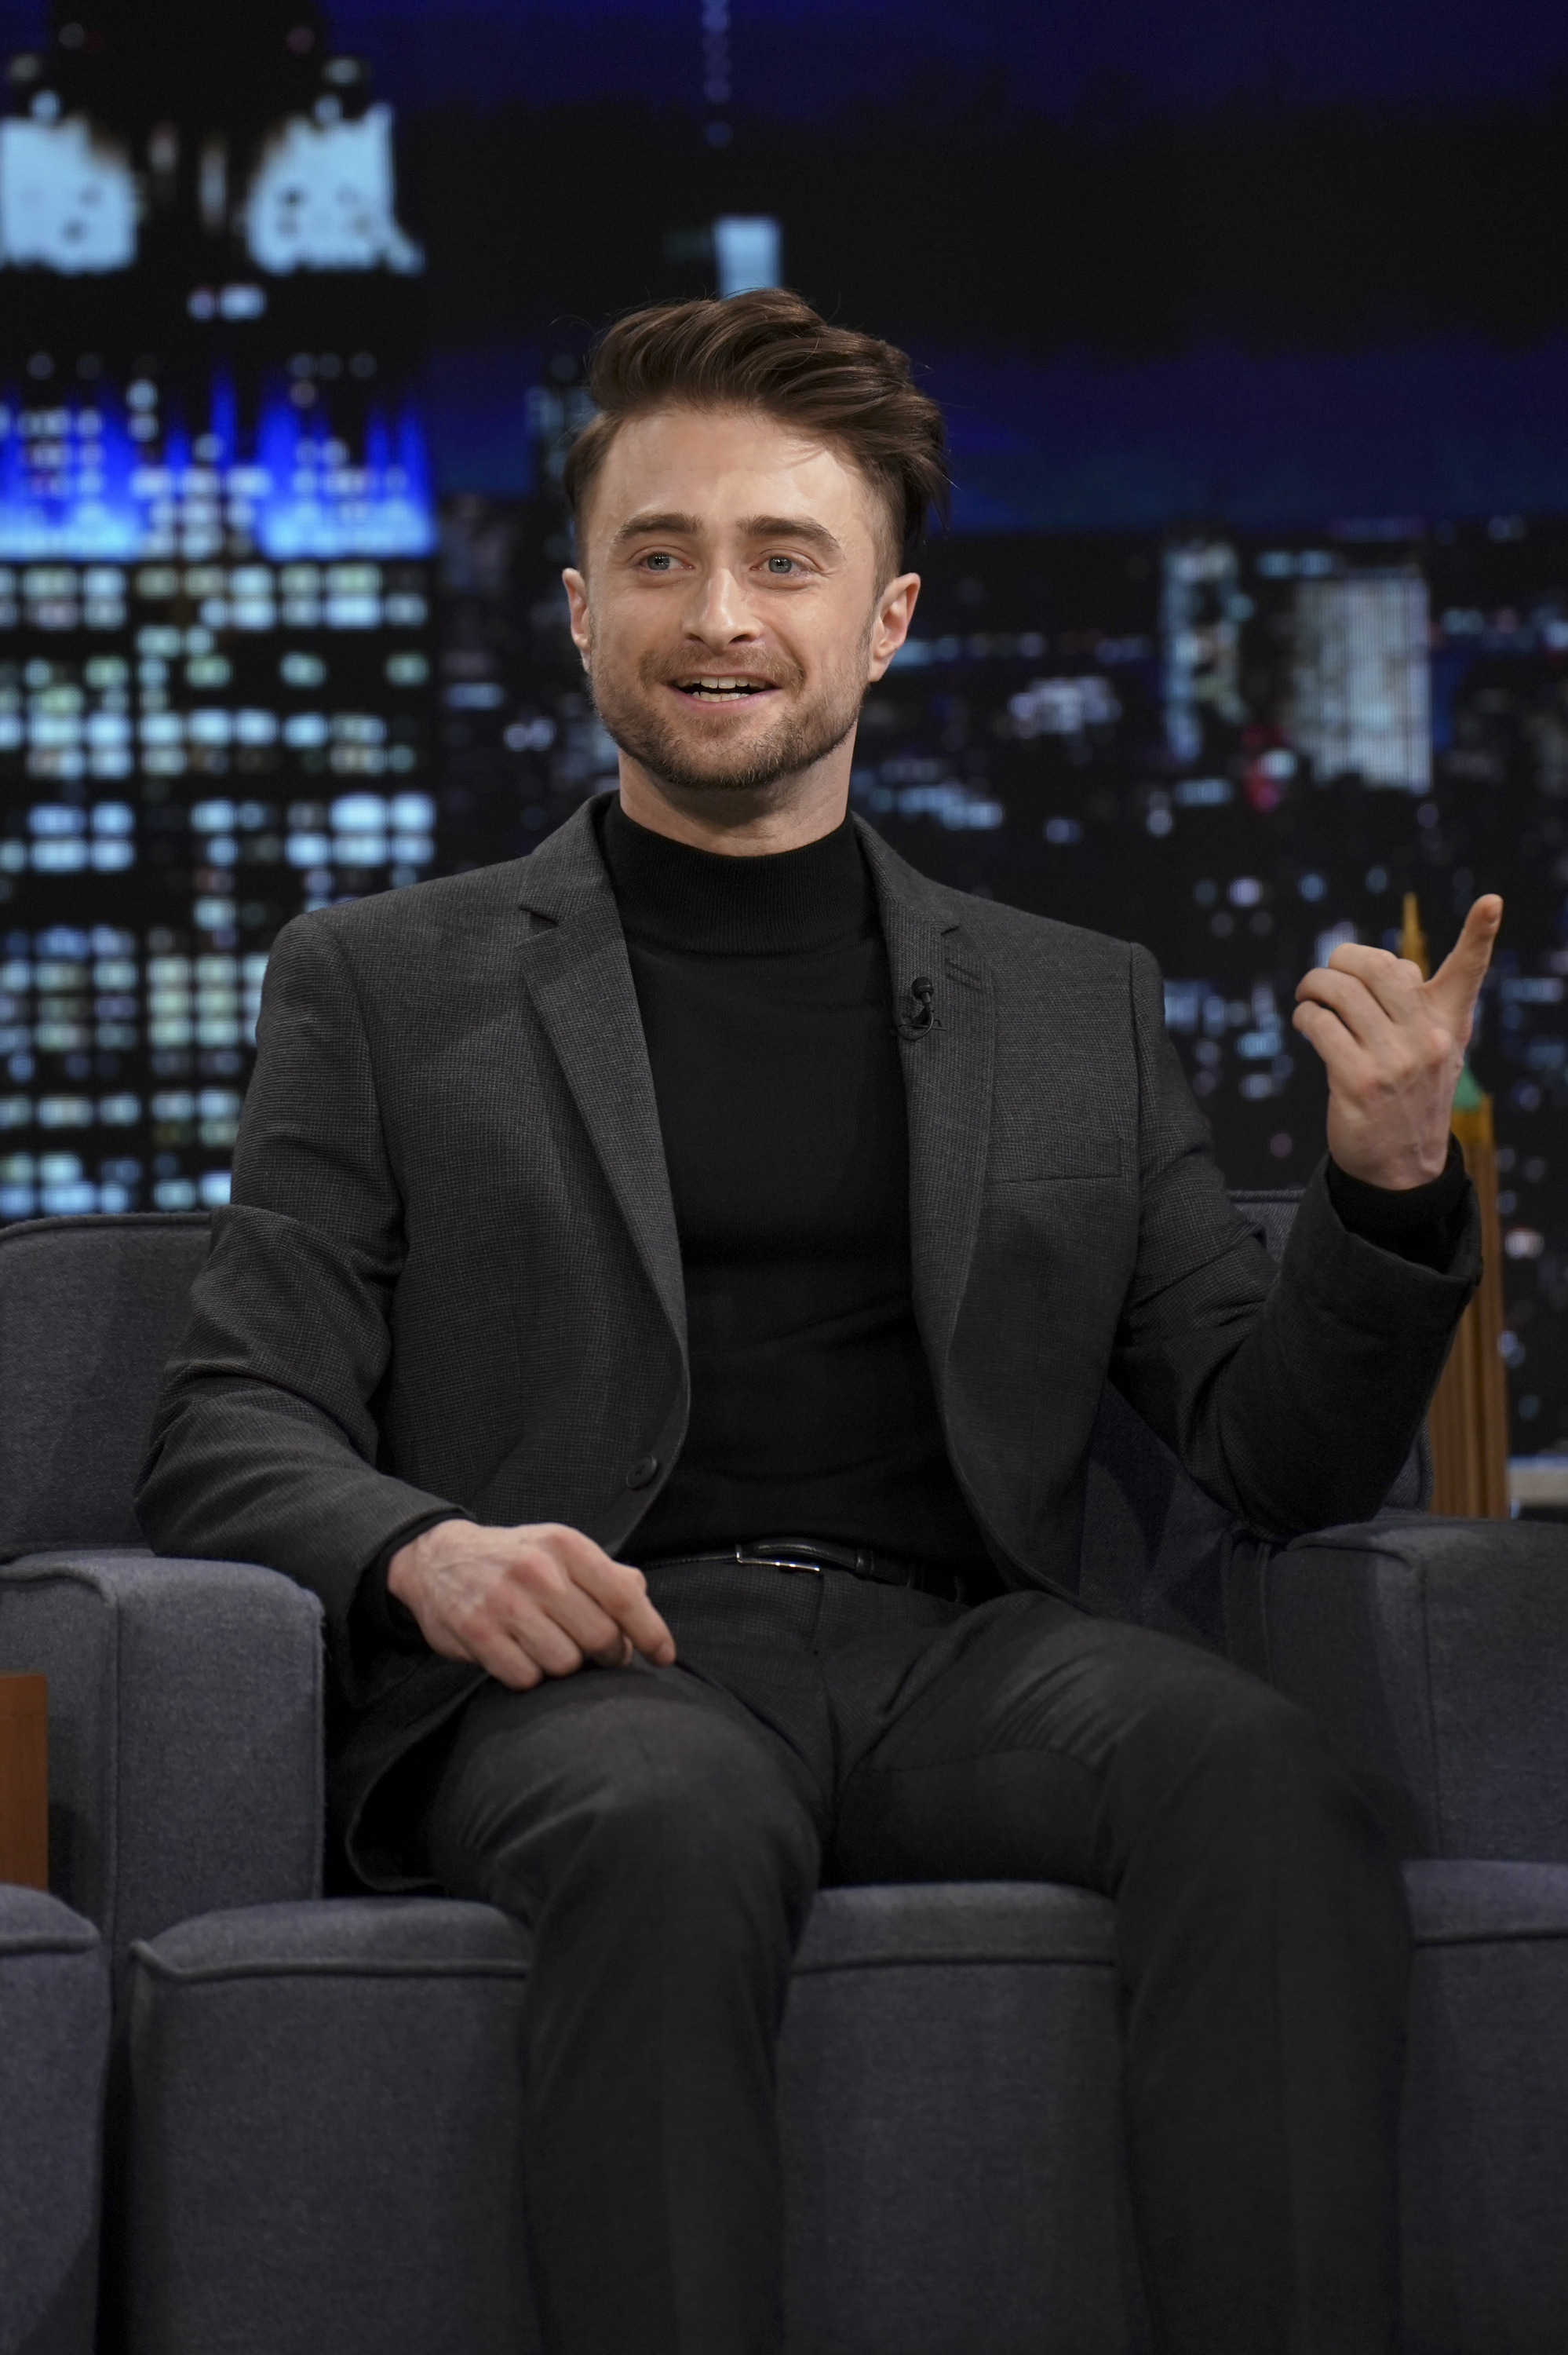 Daniel Radcliffe on "The Tonight Show Starring Jimmy Fallon" in March 2022 | Source: Getty Images